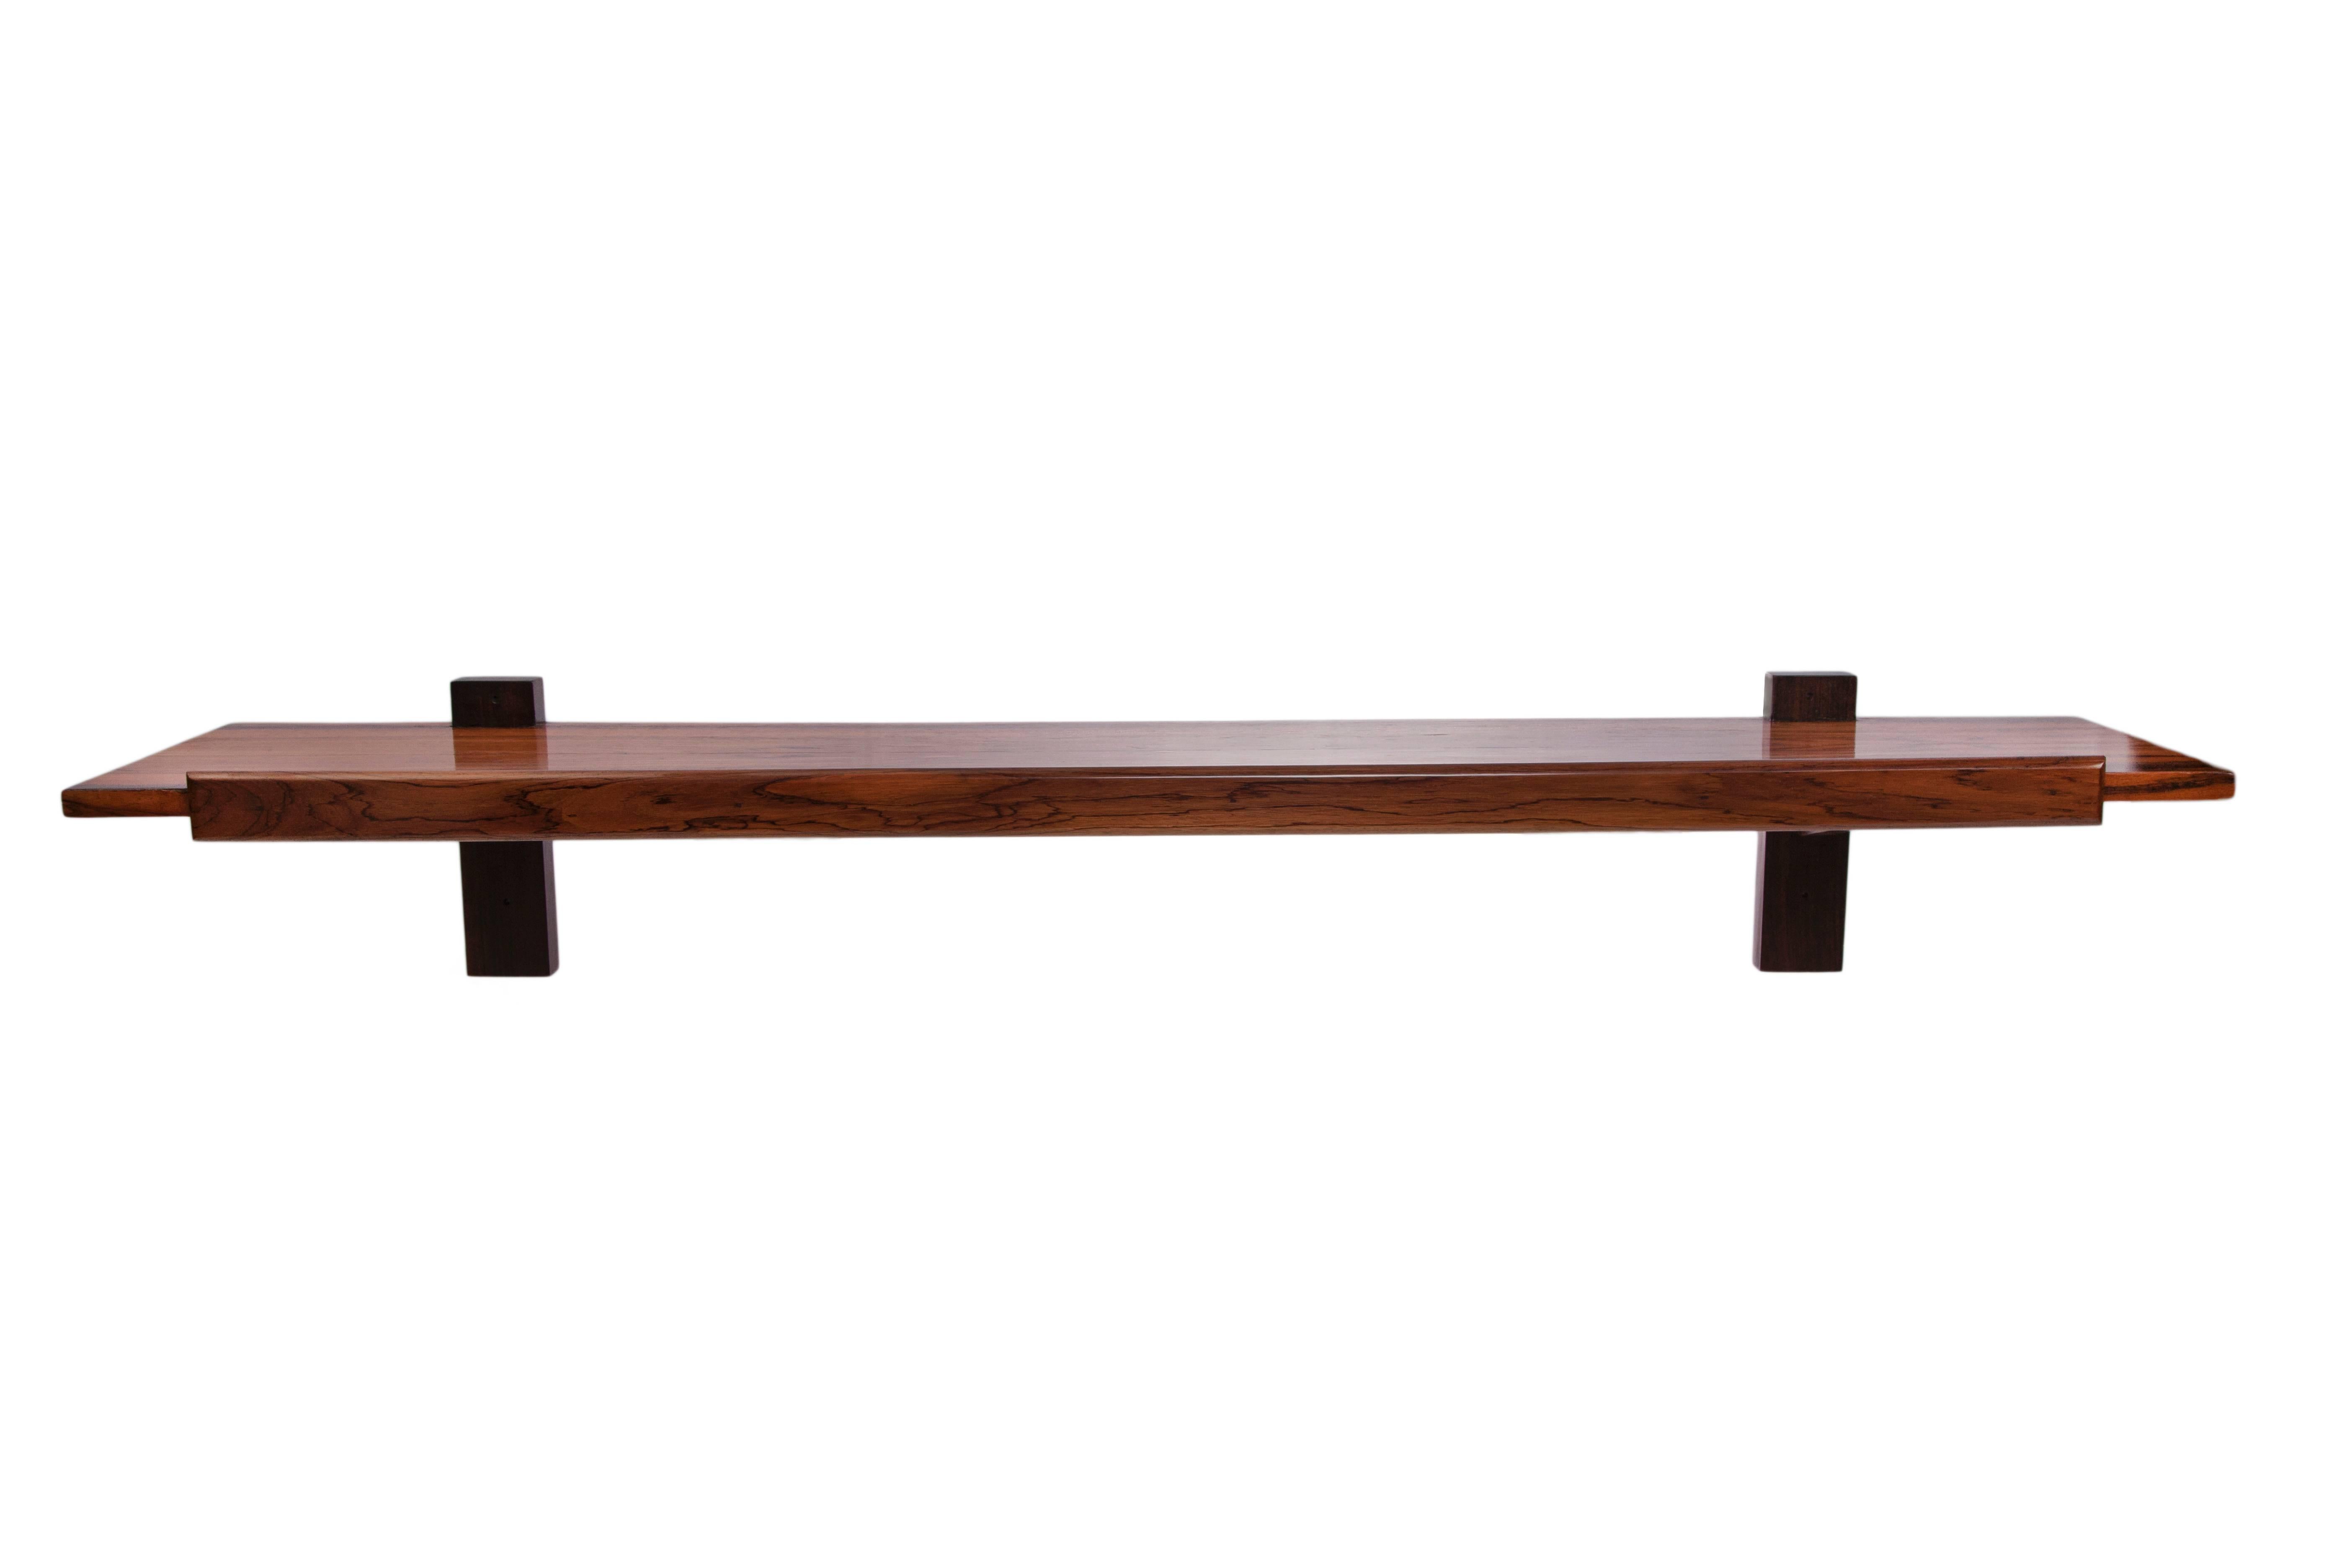 A wall-mount console by designer Sergio Rodrigues, produced circa 1960s, of linear form, crafted of rich Brazilian jacaranda. Very good vintage condition.

10906